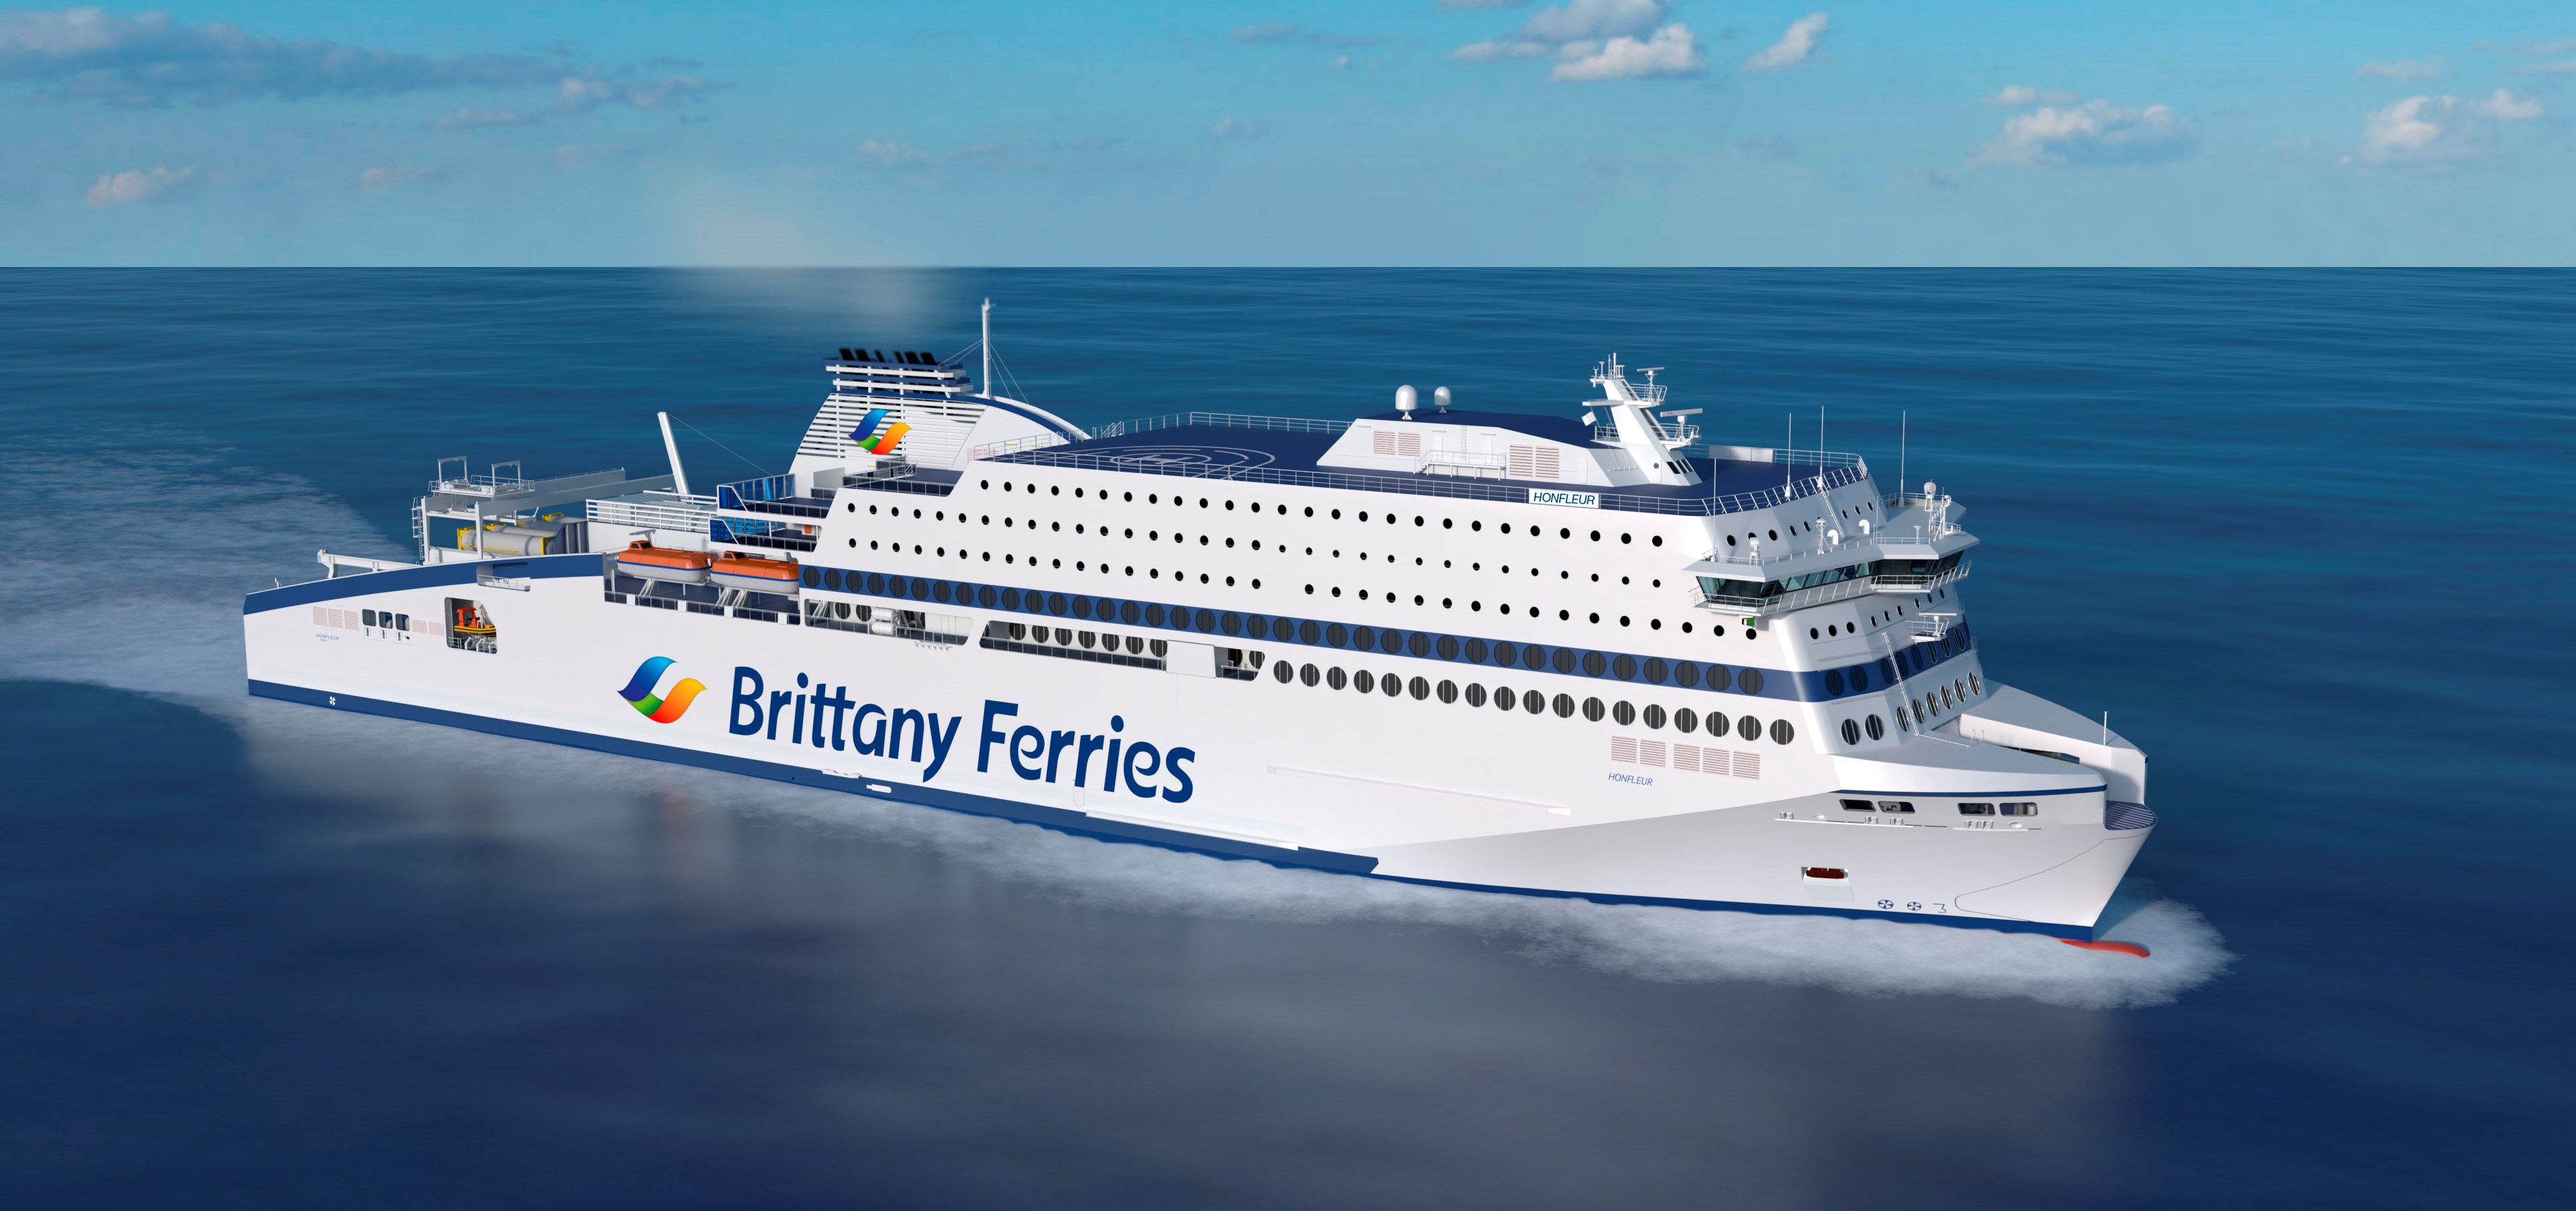 Brittany Ferries LNG-powered vessel delivery delayed